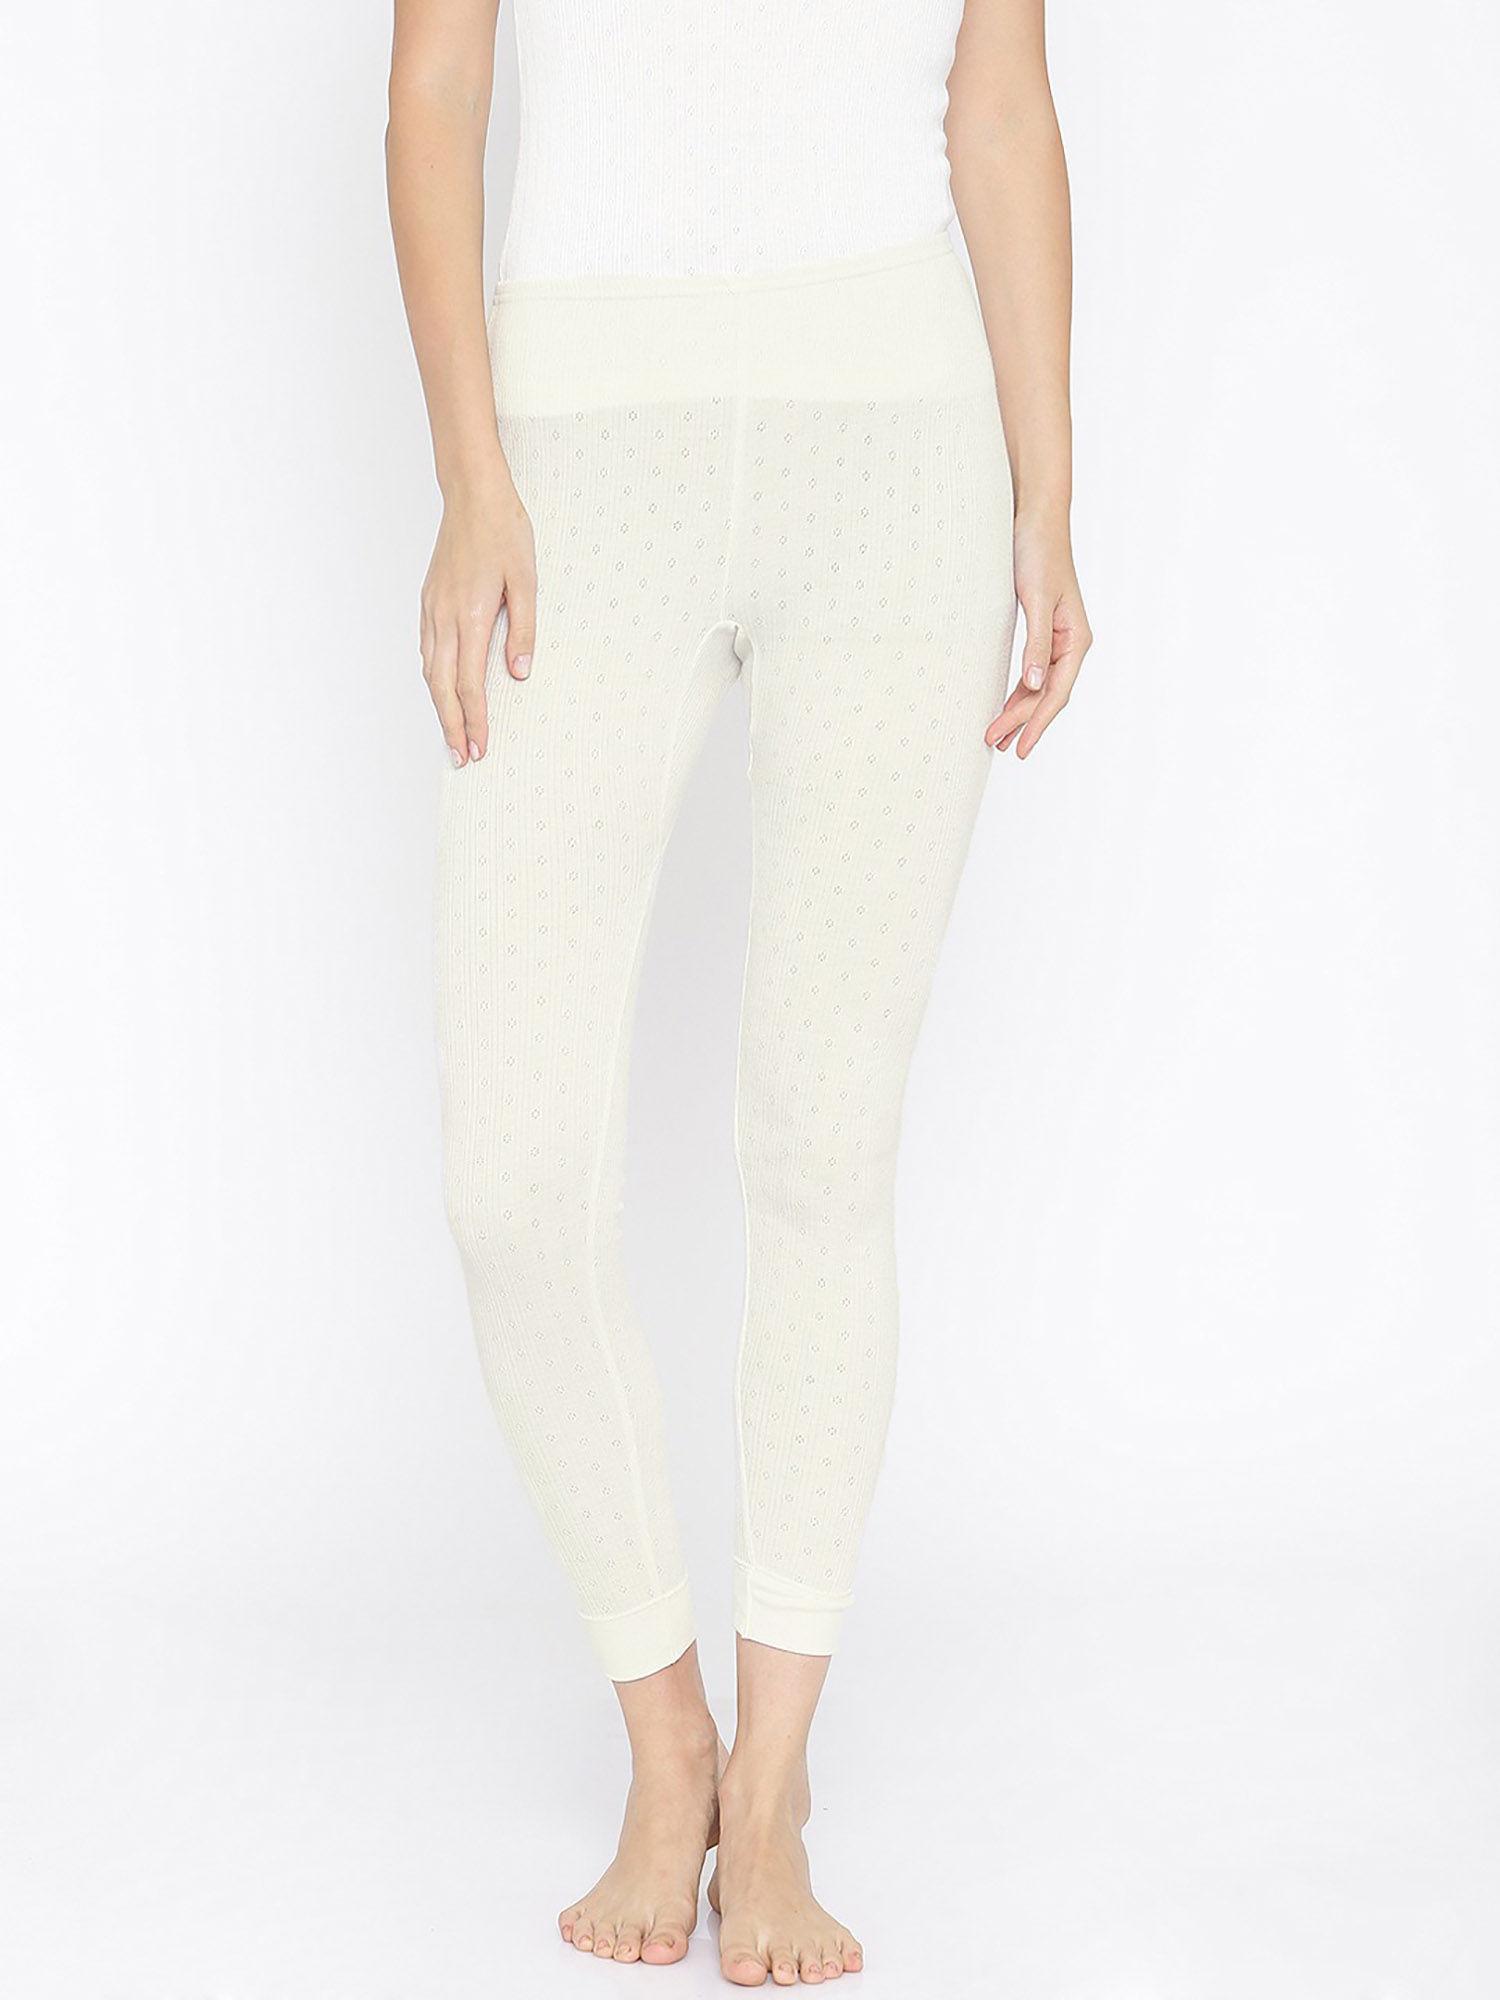 off white patterned thermal leggings